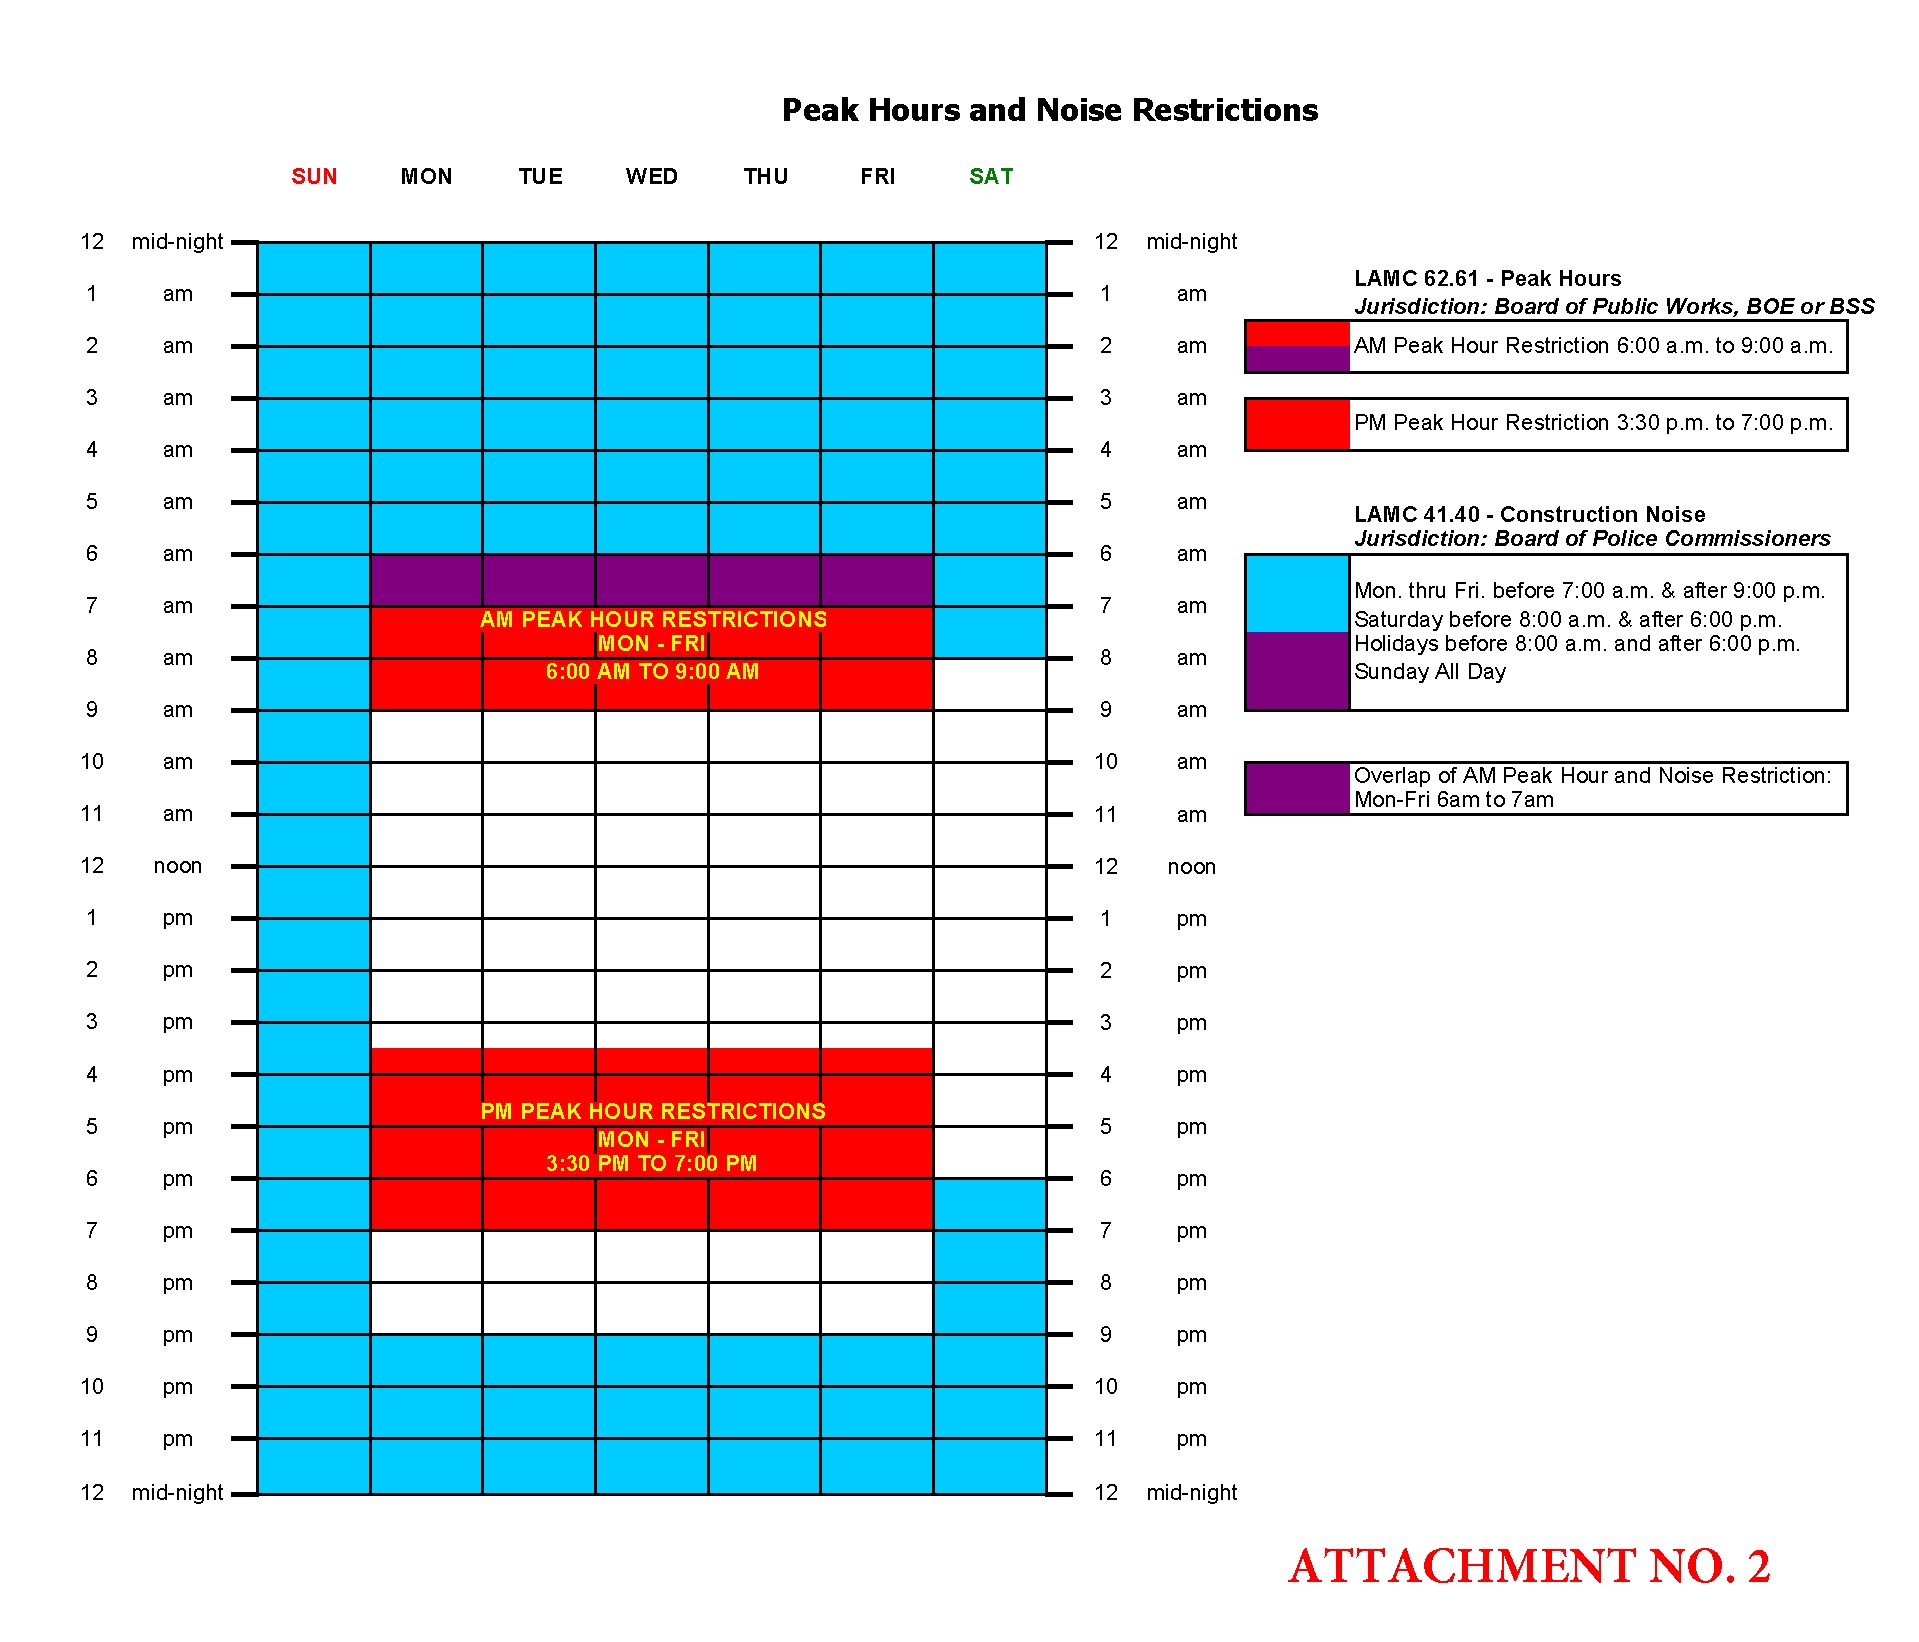 Picture of a Peak Hour and Noise Restriction hour chart